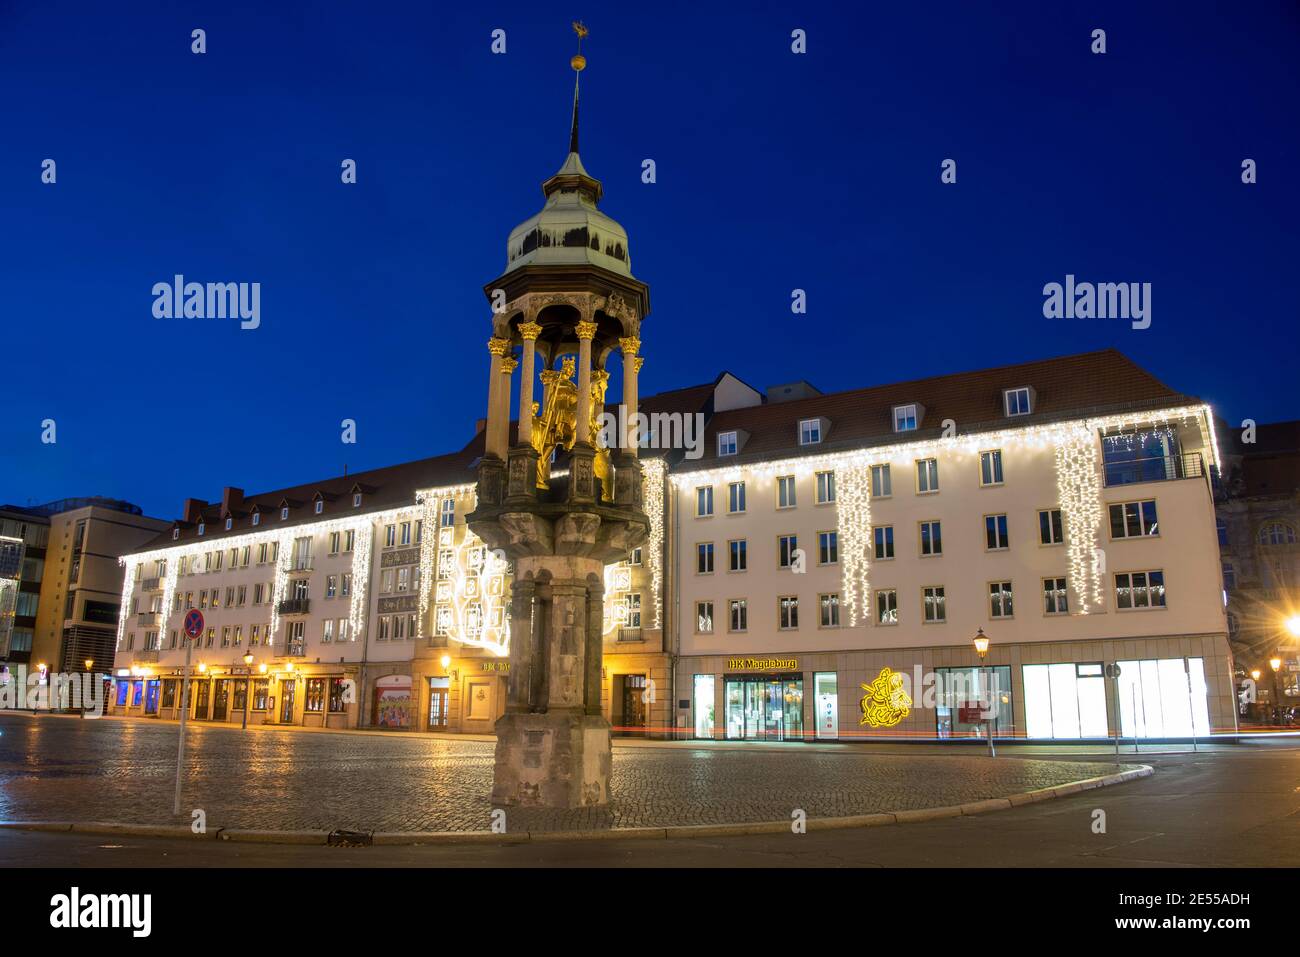 Magdeburg, Germany. 23rd Jan, 2021. A copy of the Magdeburg Rider stands on the Old Market Square. The original is in the Kulturhistorisches Museum Magdeburg, in the Kaiser-Otto-Saal. The Old Market is deserted in the early evening. Credit: Stephan Schulz/dpa-Zentralbild/ZB/dpa/Alamy Live News Stock Photo